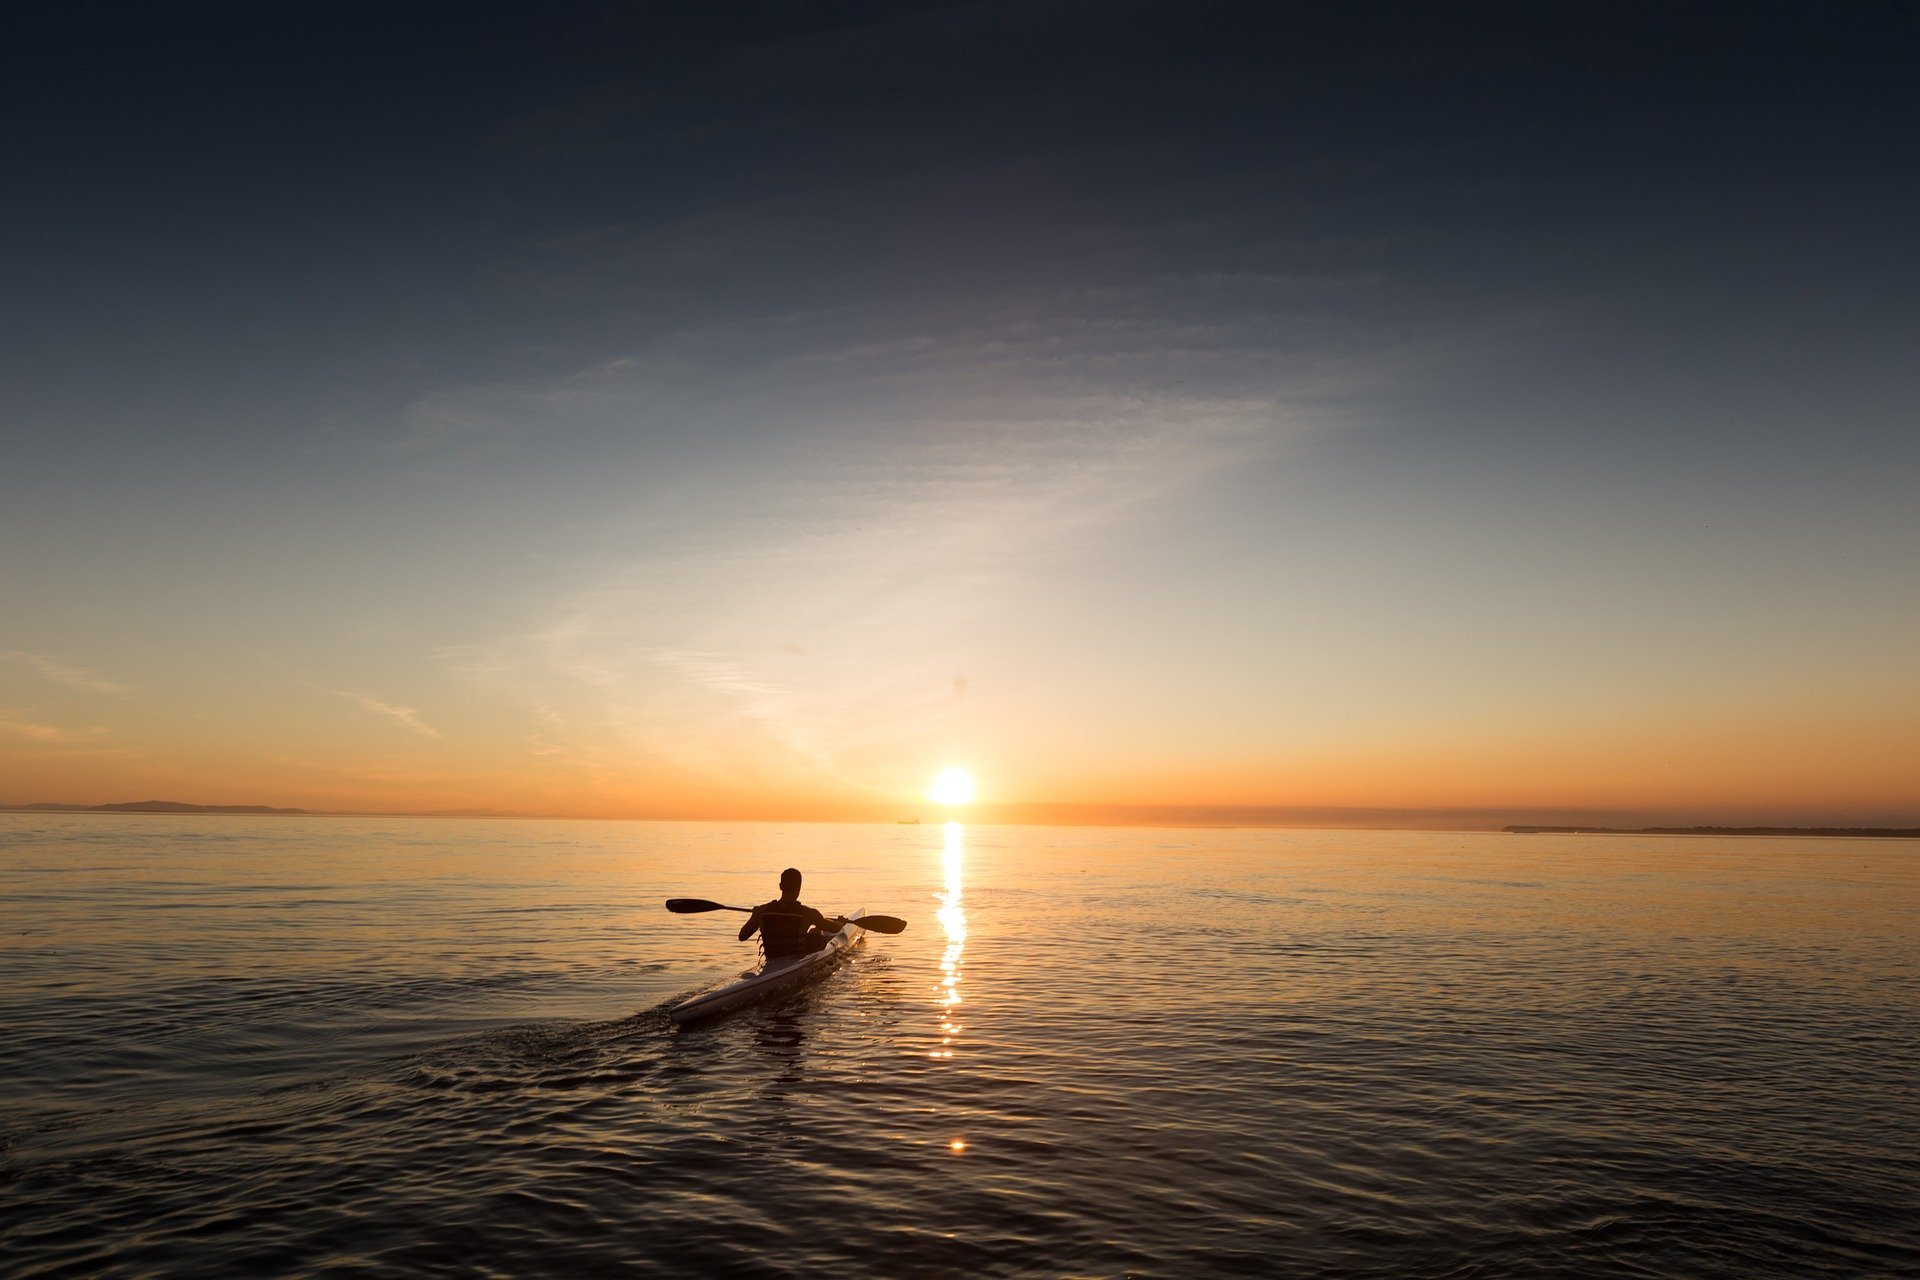 Paddling into the sunset.